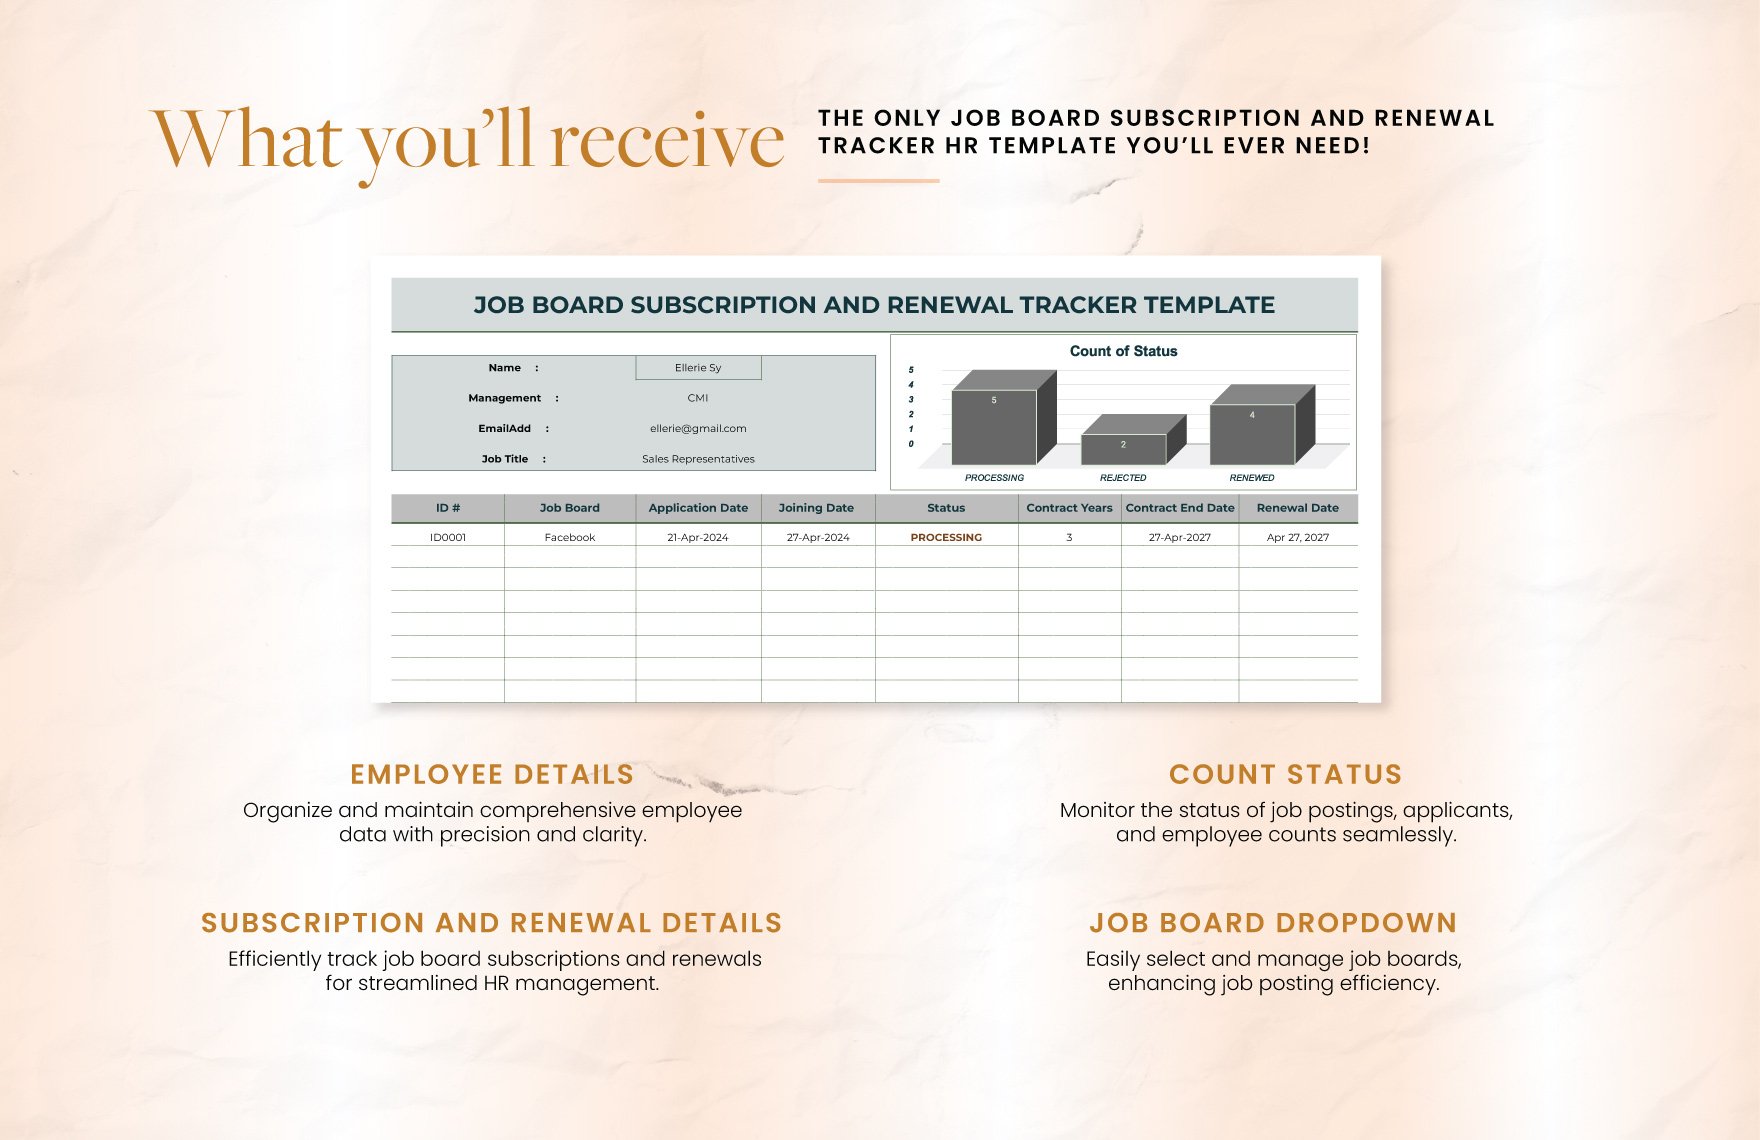 Job Board Subscription and Renewal Tracker HR Template